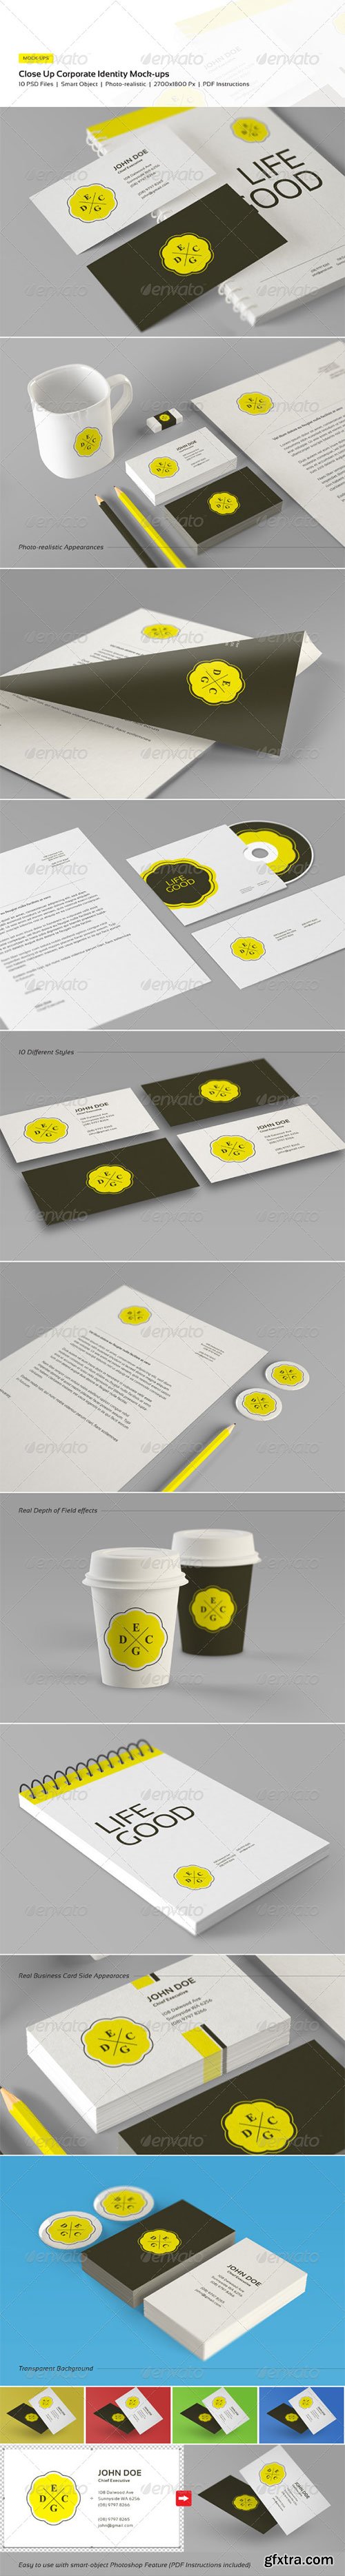 GraphicRiver - Close Up Corporate Identity and Branding Mock-Ups